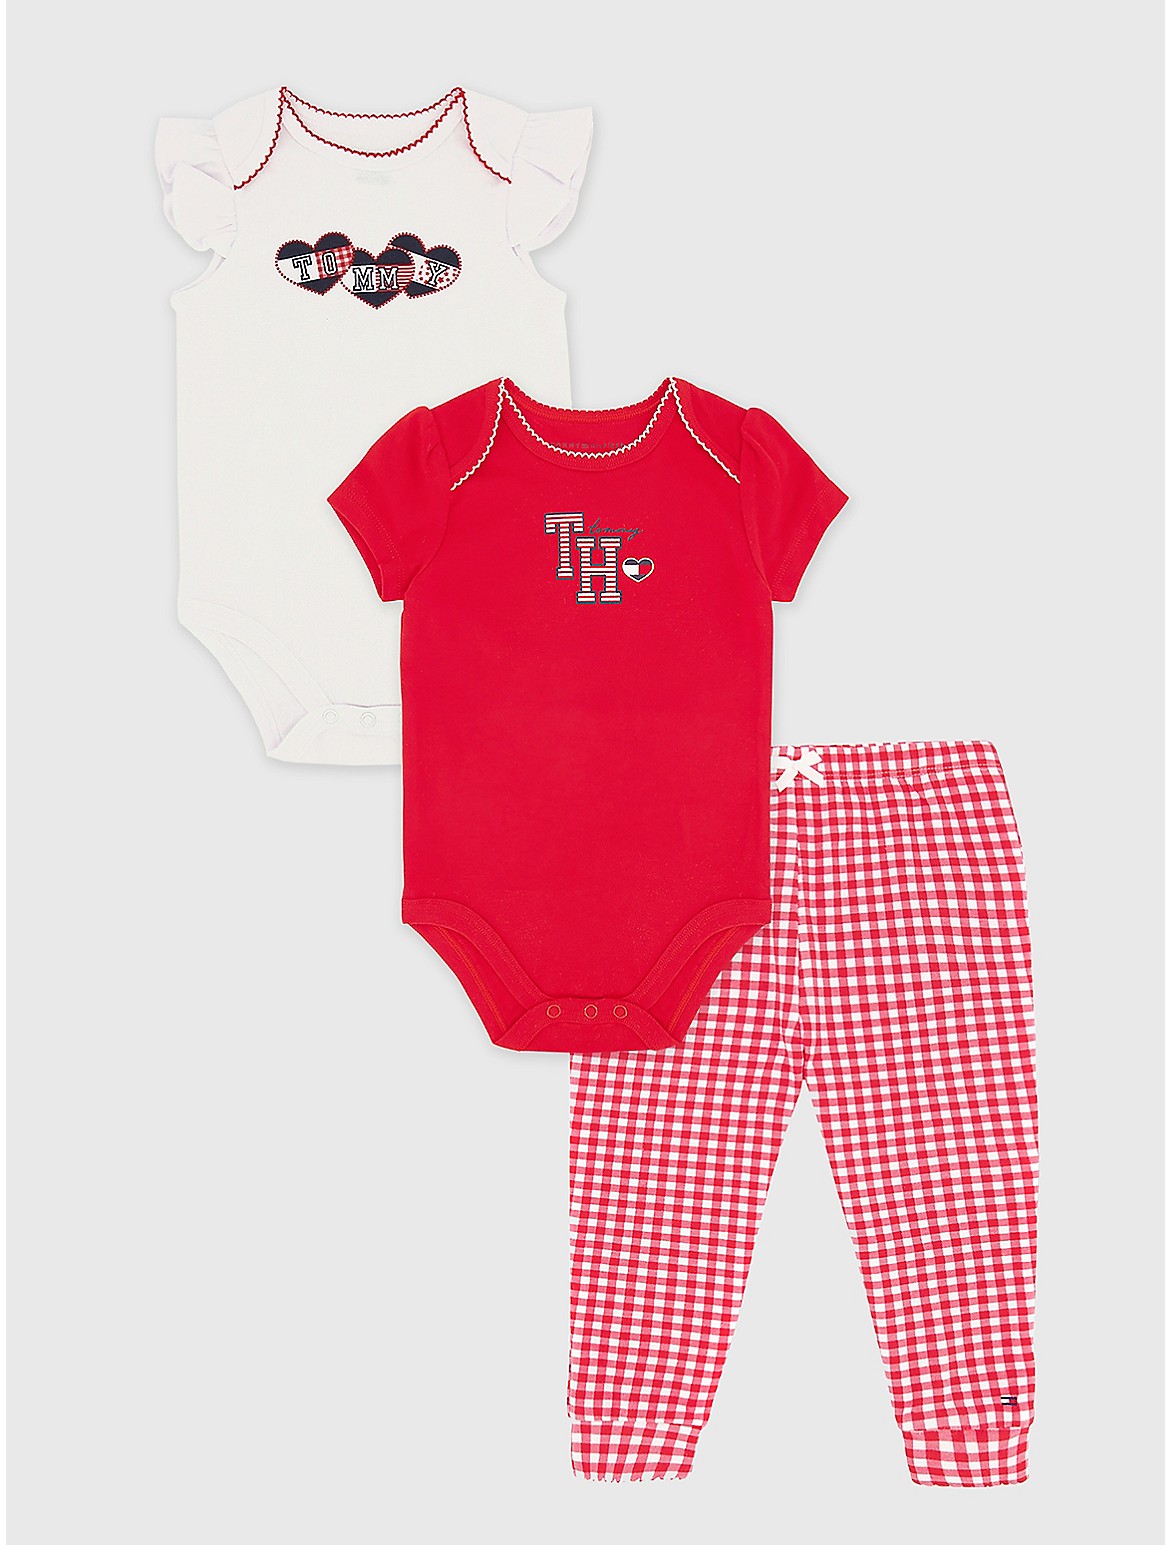 Tommy Hilfiger Girls' Babies' Onesie and Pant Set 3PC - Multi - 18M